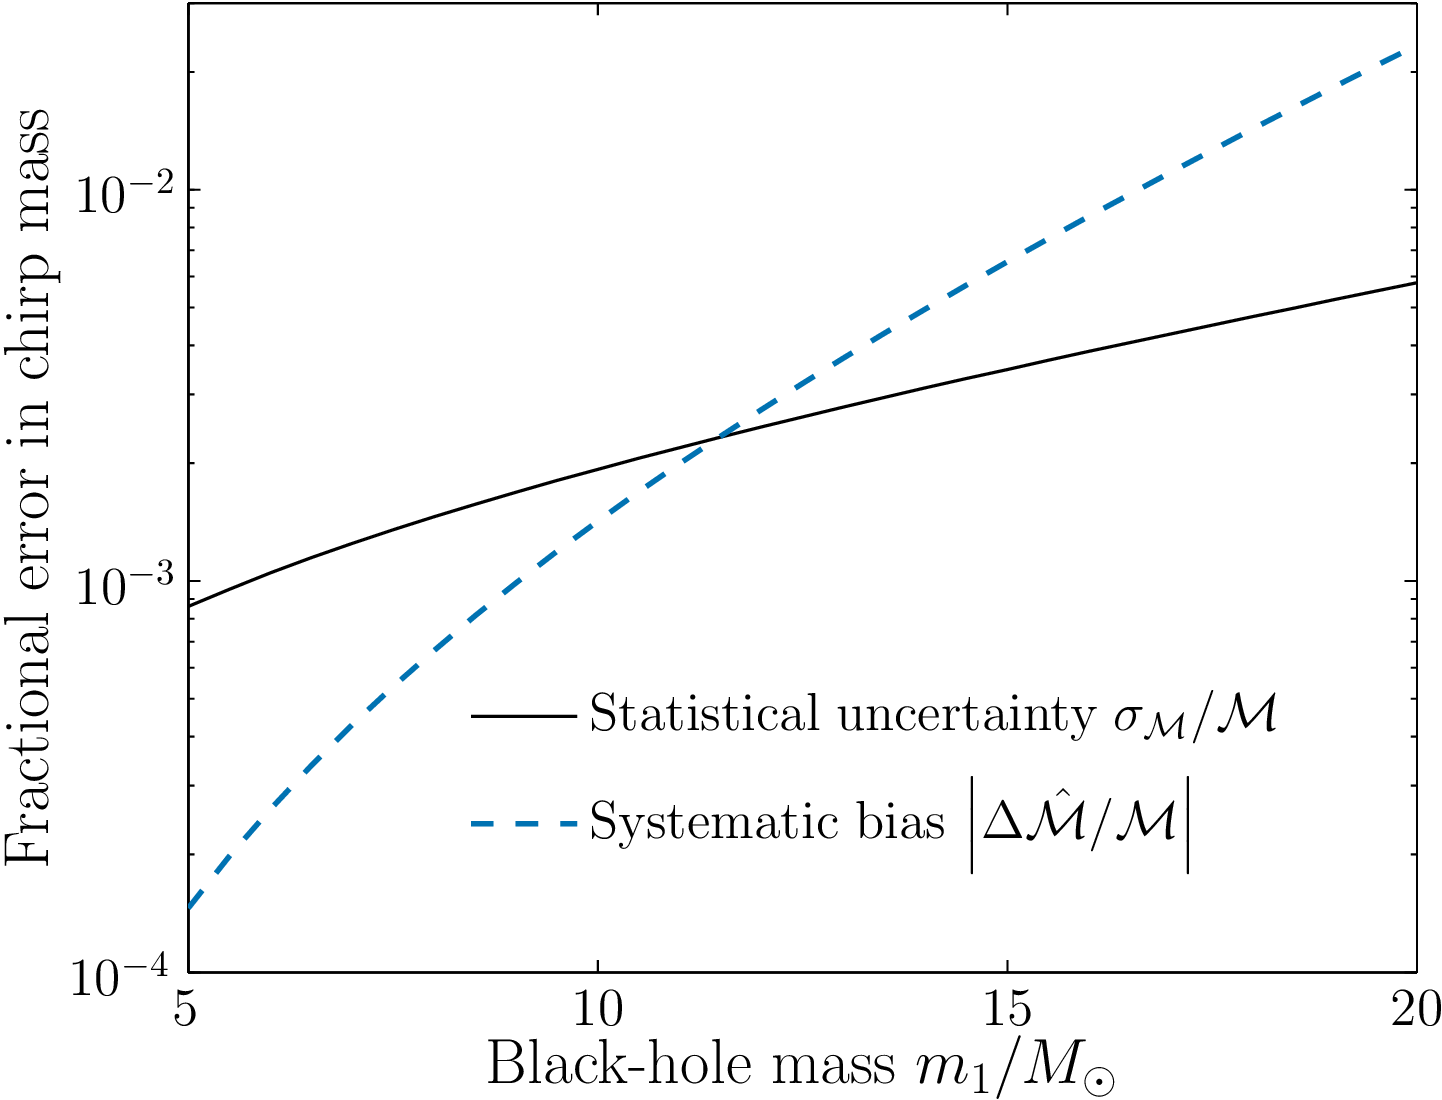 Systematic error verses statistical uncertainty as a function of mass